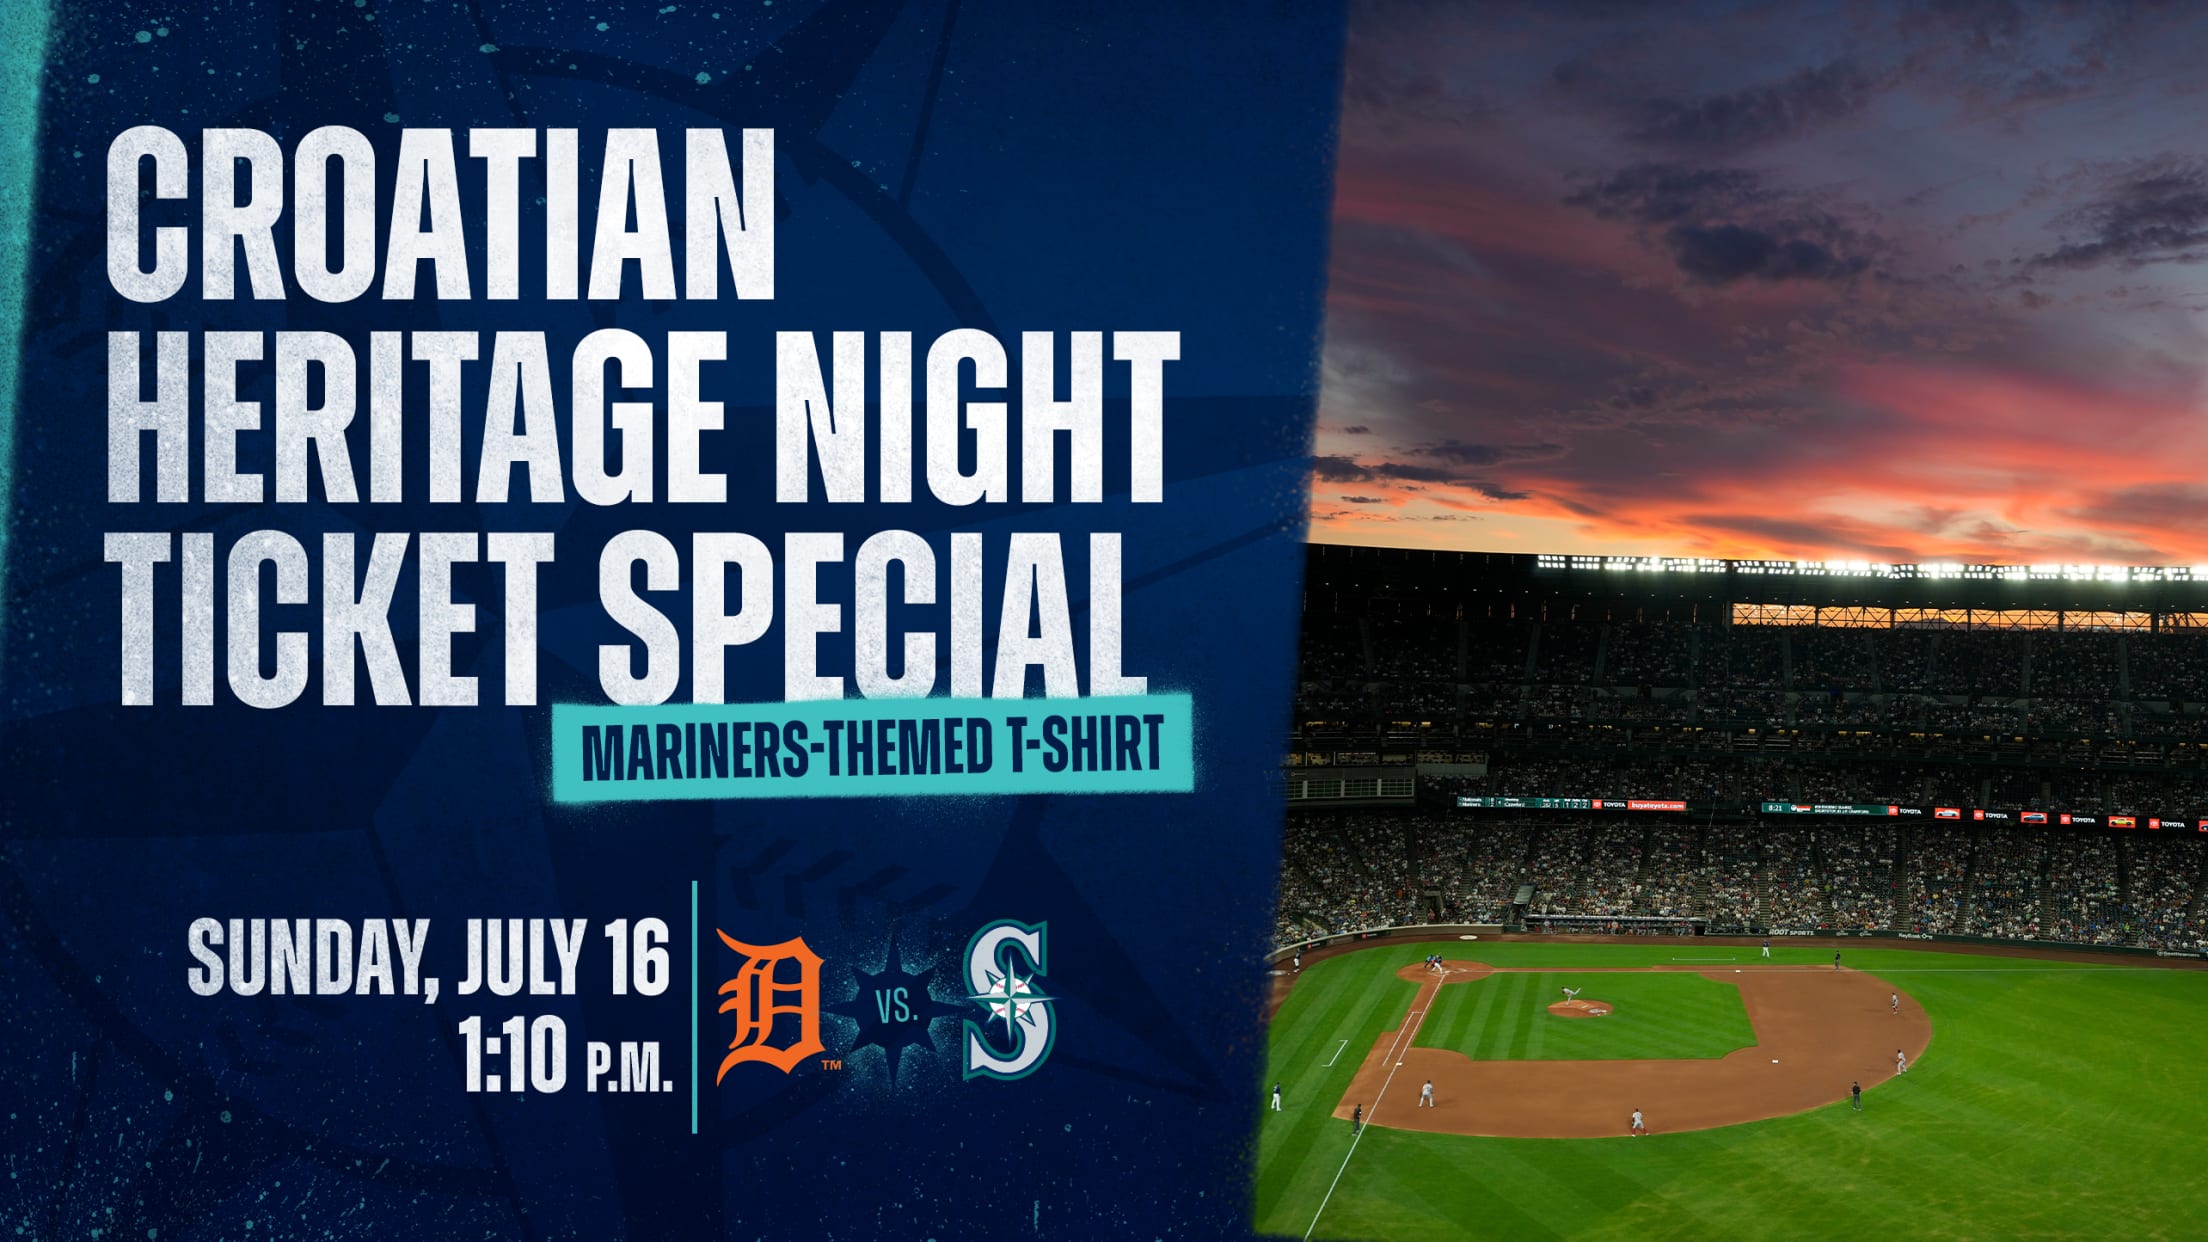 MLB: Seattle Mariners to hold Croatian Heritage Hight at T-Mobile Park
